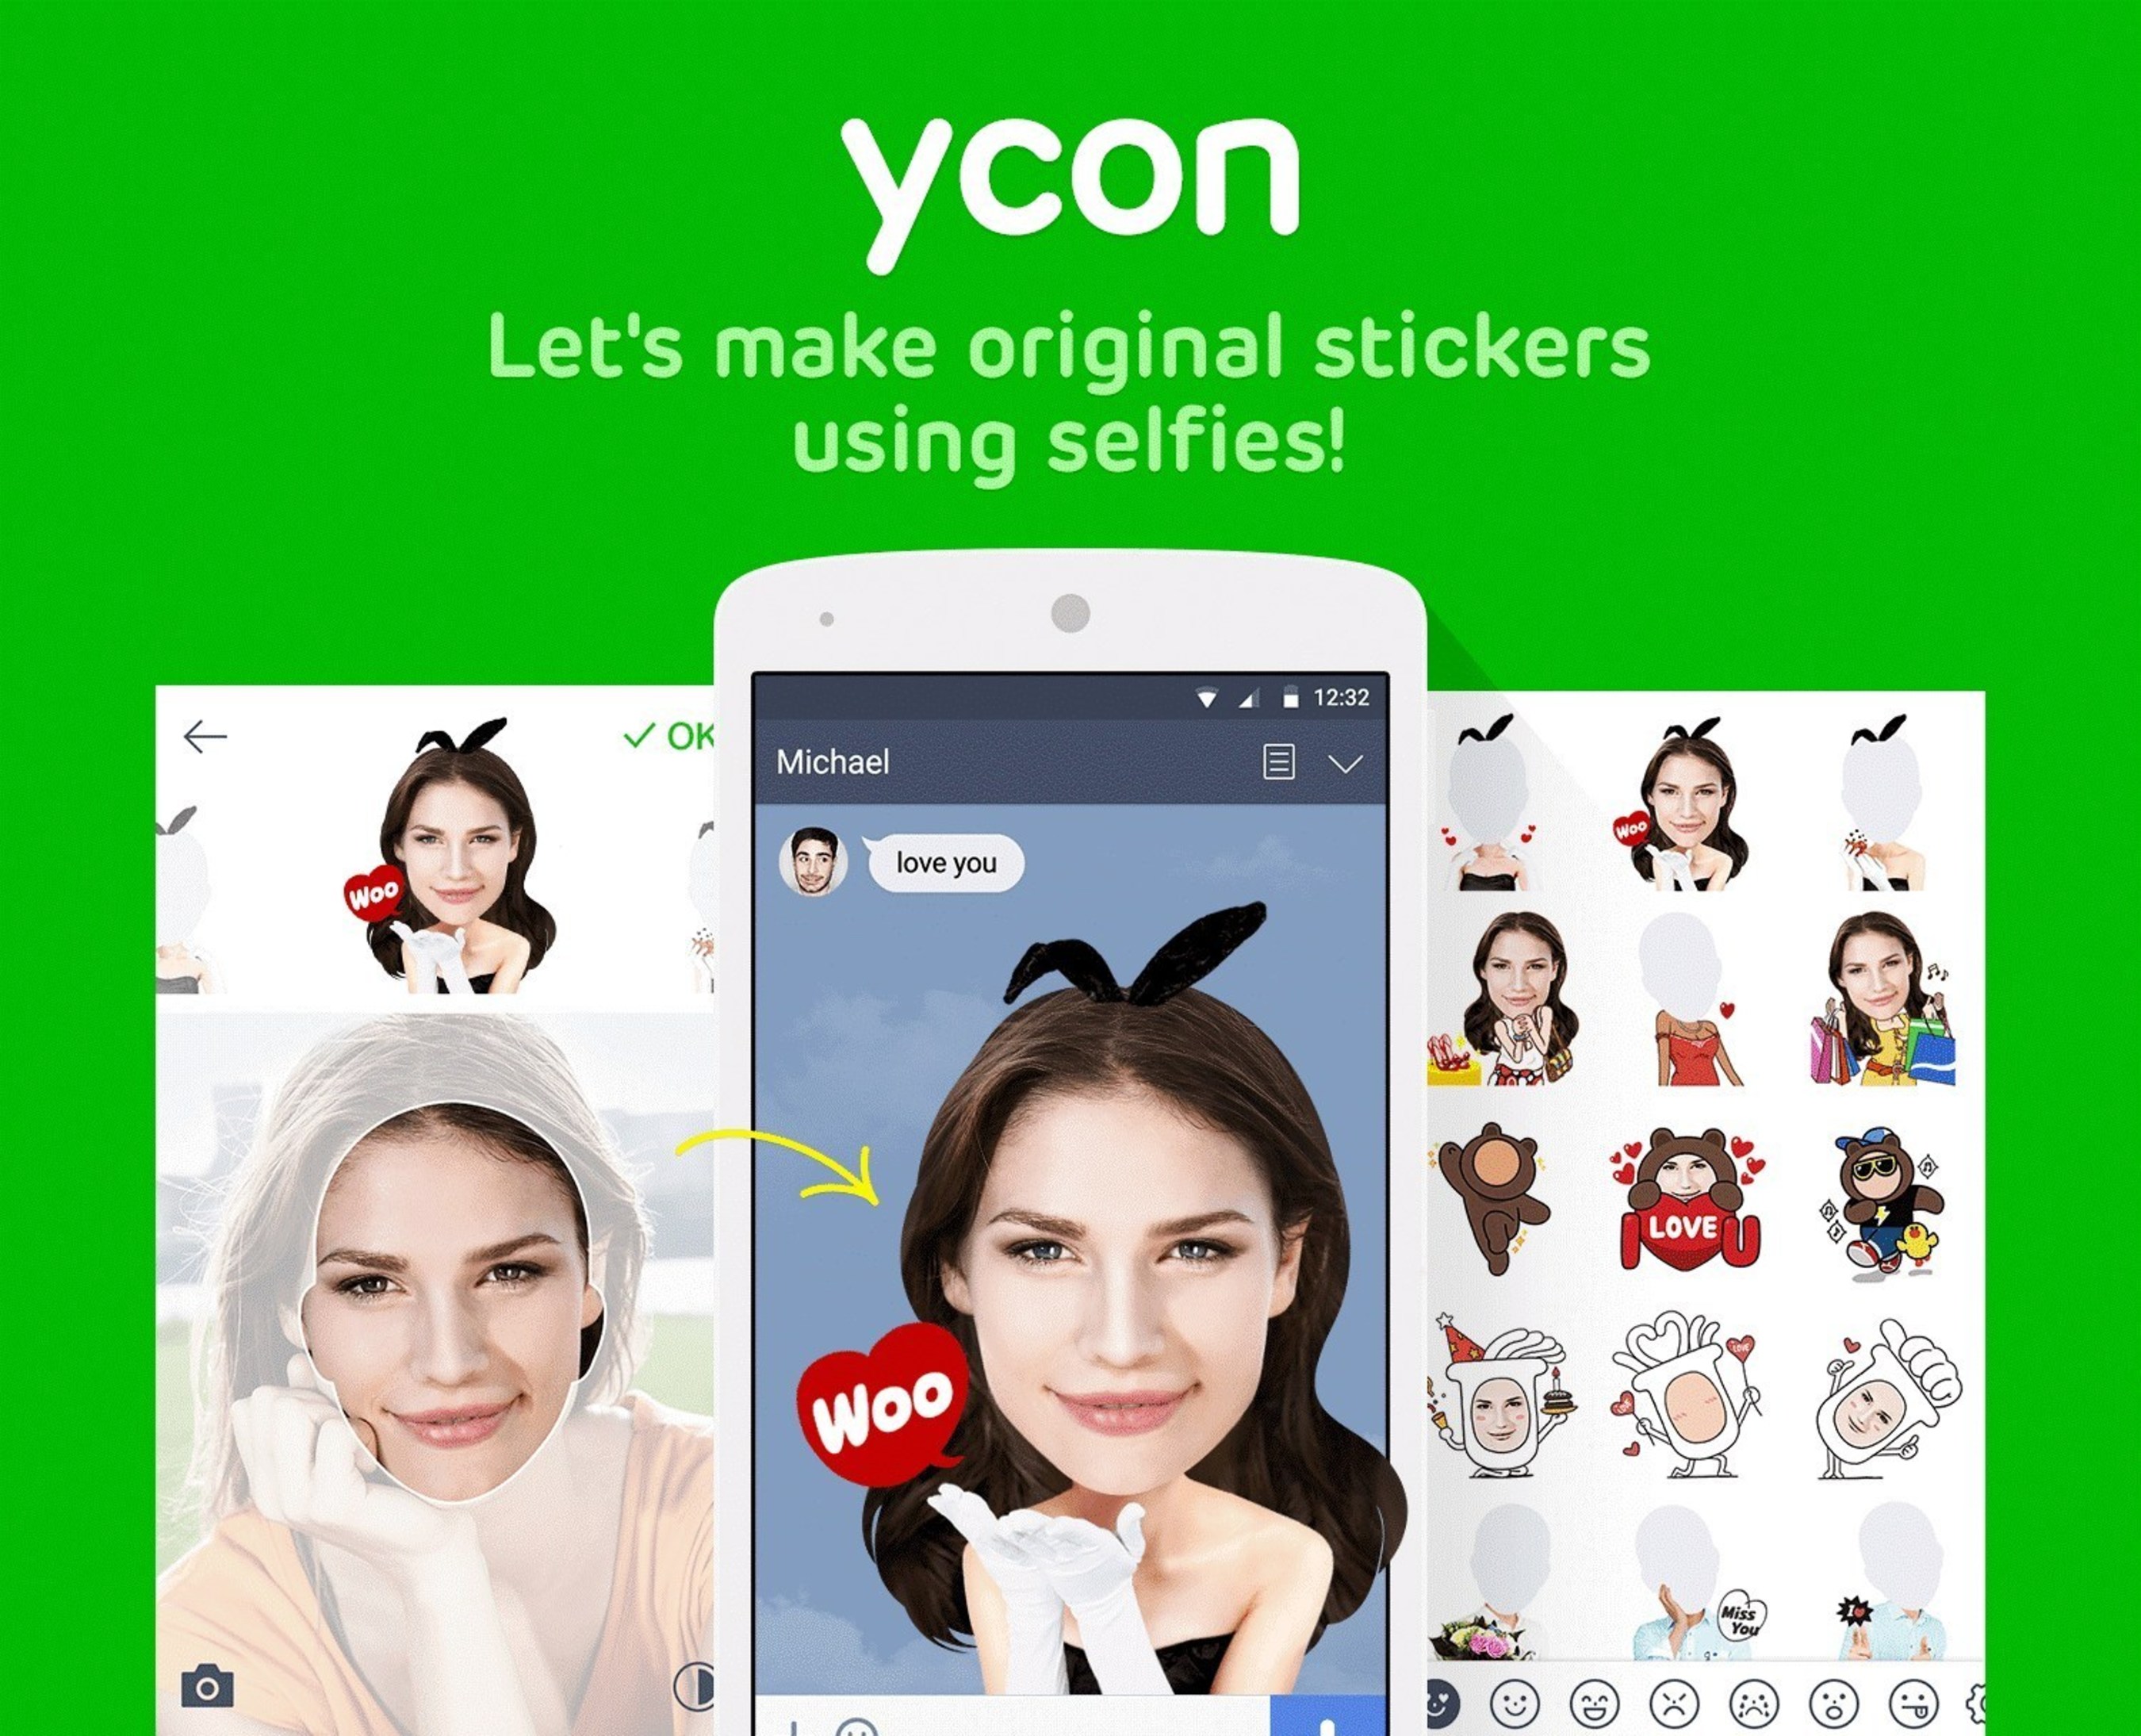 LINE Officially Launches Selfie Sticker Creation App "ycon"